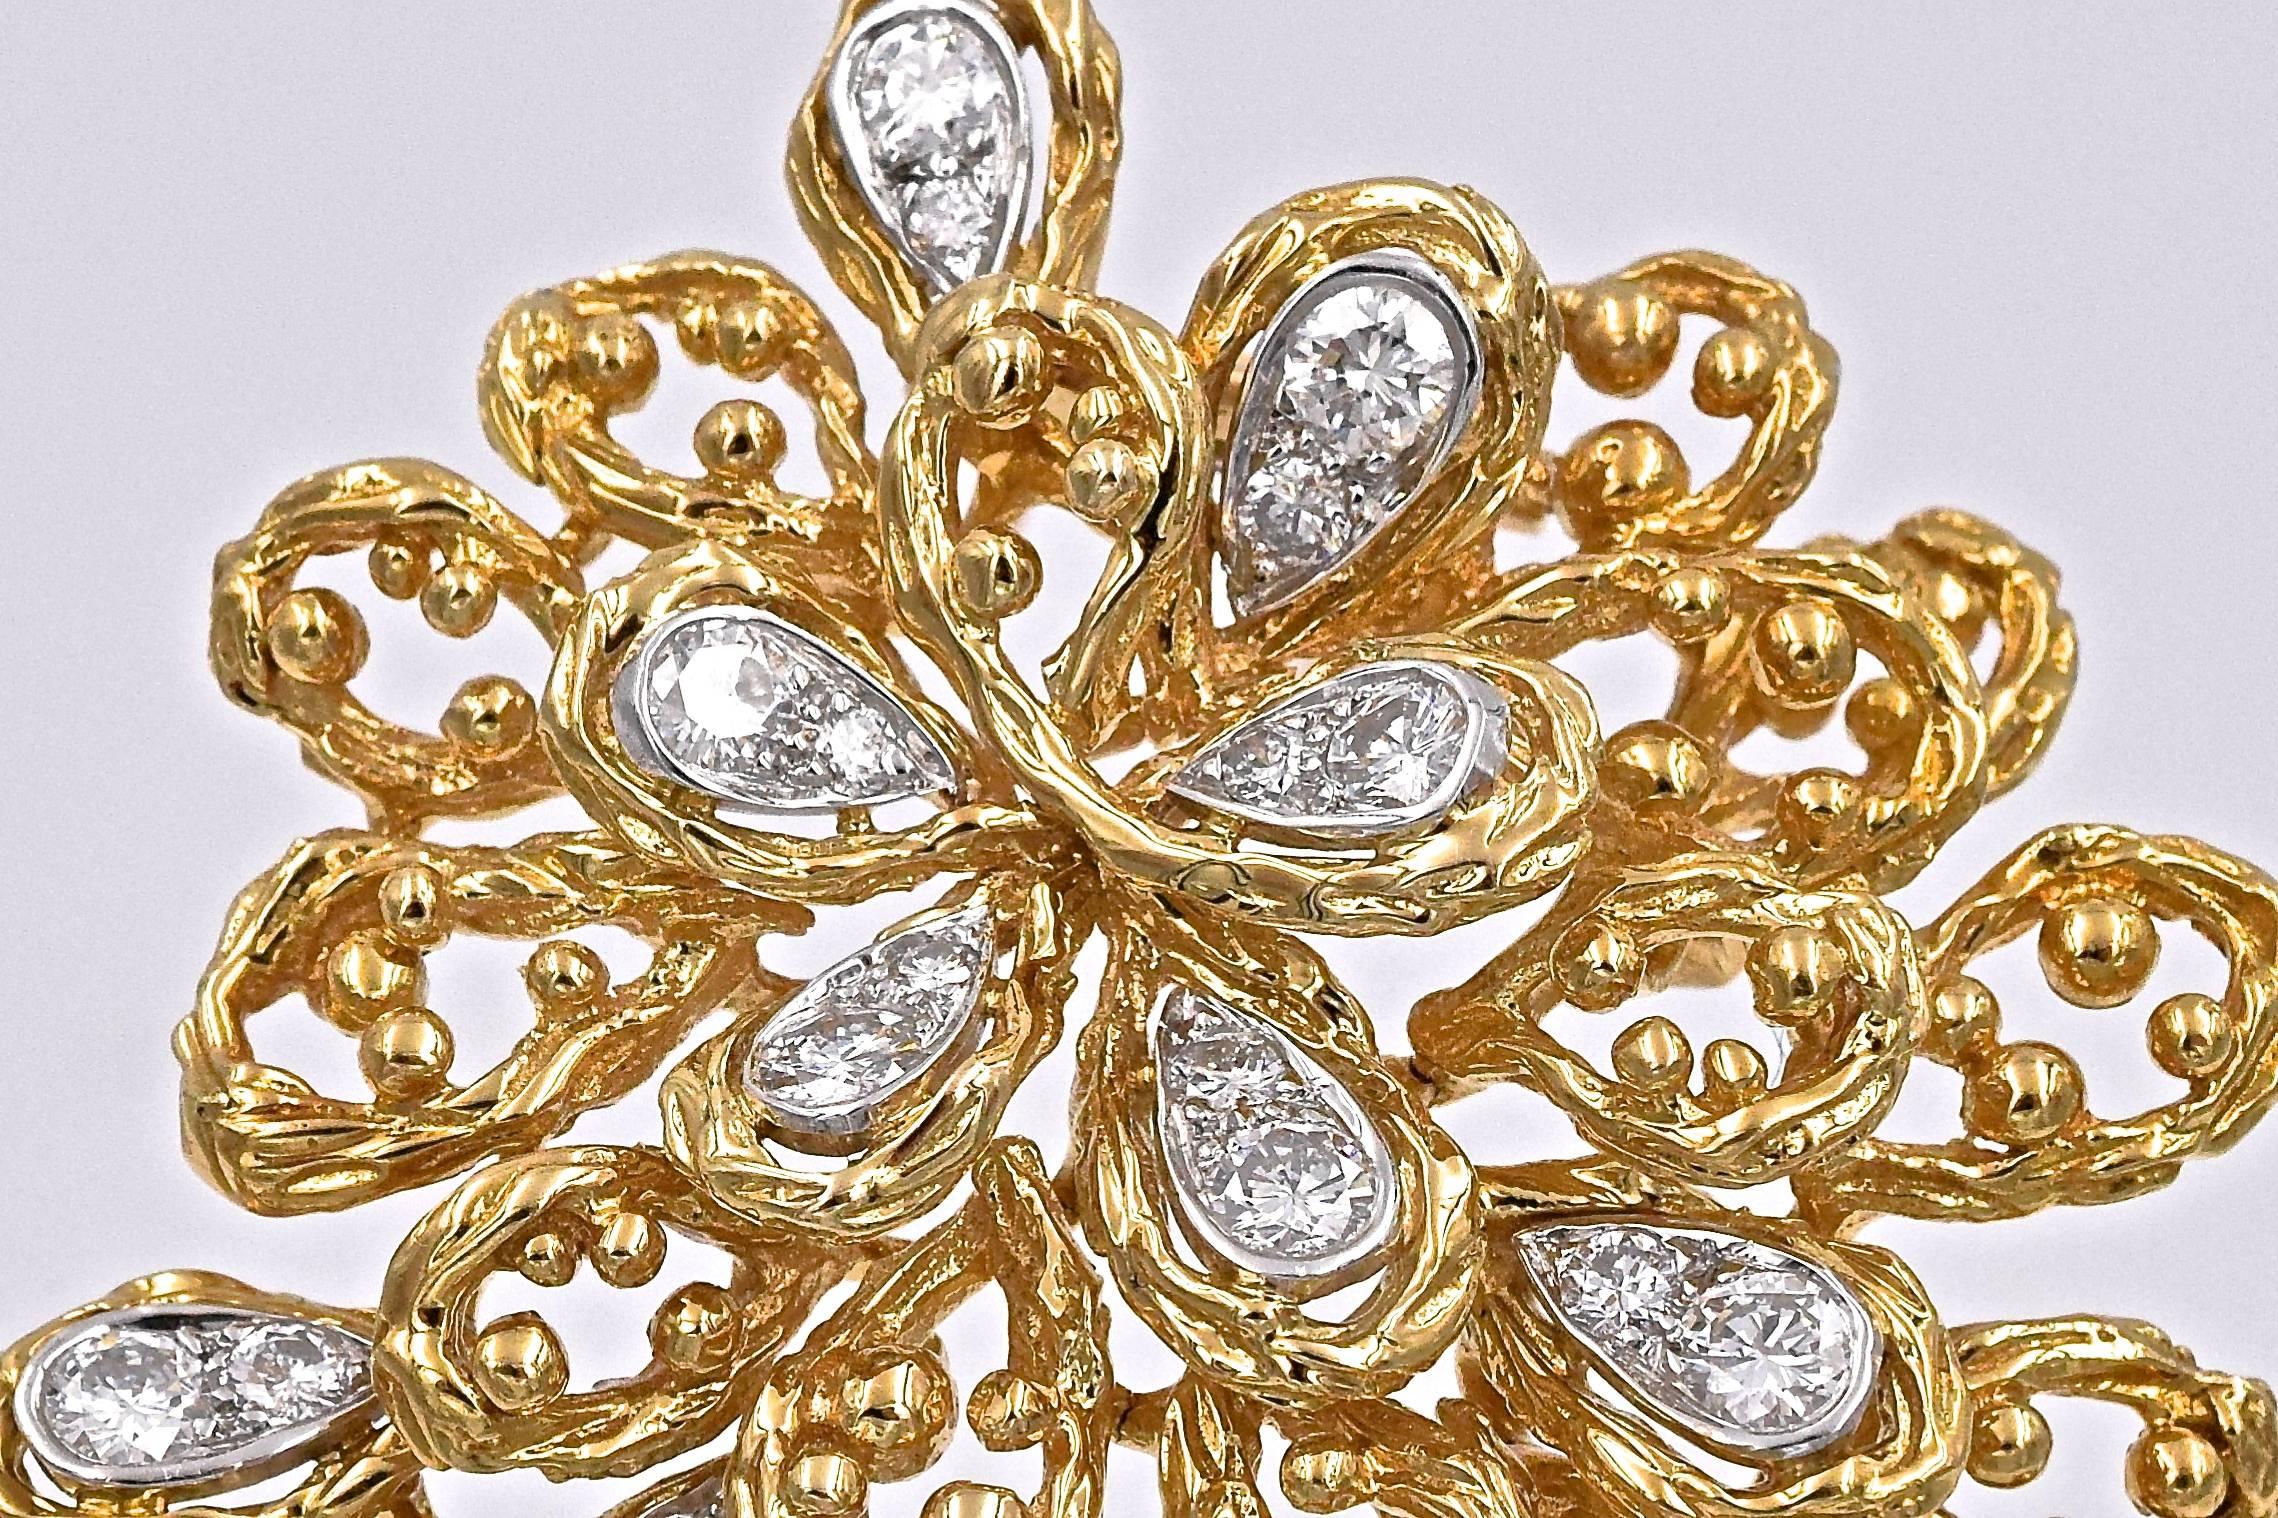 Impressive Van Cleef and Arpels diamond brooch with 20 brilliant shape tdiamonds weighing approximately 4.5 carats set in 18k yellow gold.
Circa 1965
With makers signature : Van Cleef and Arpels / FRANCE  and  numbered xxxxxxxx